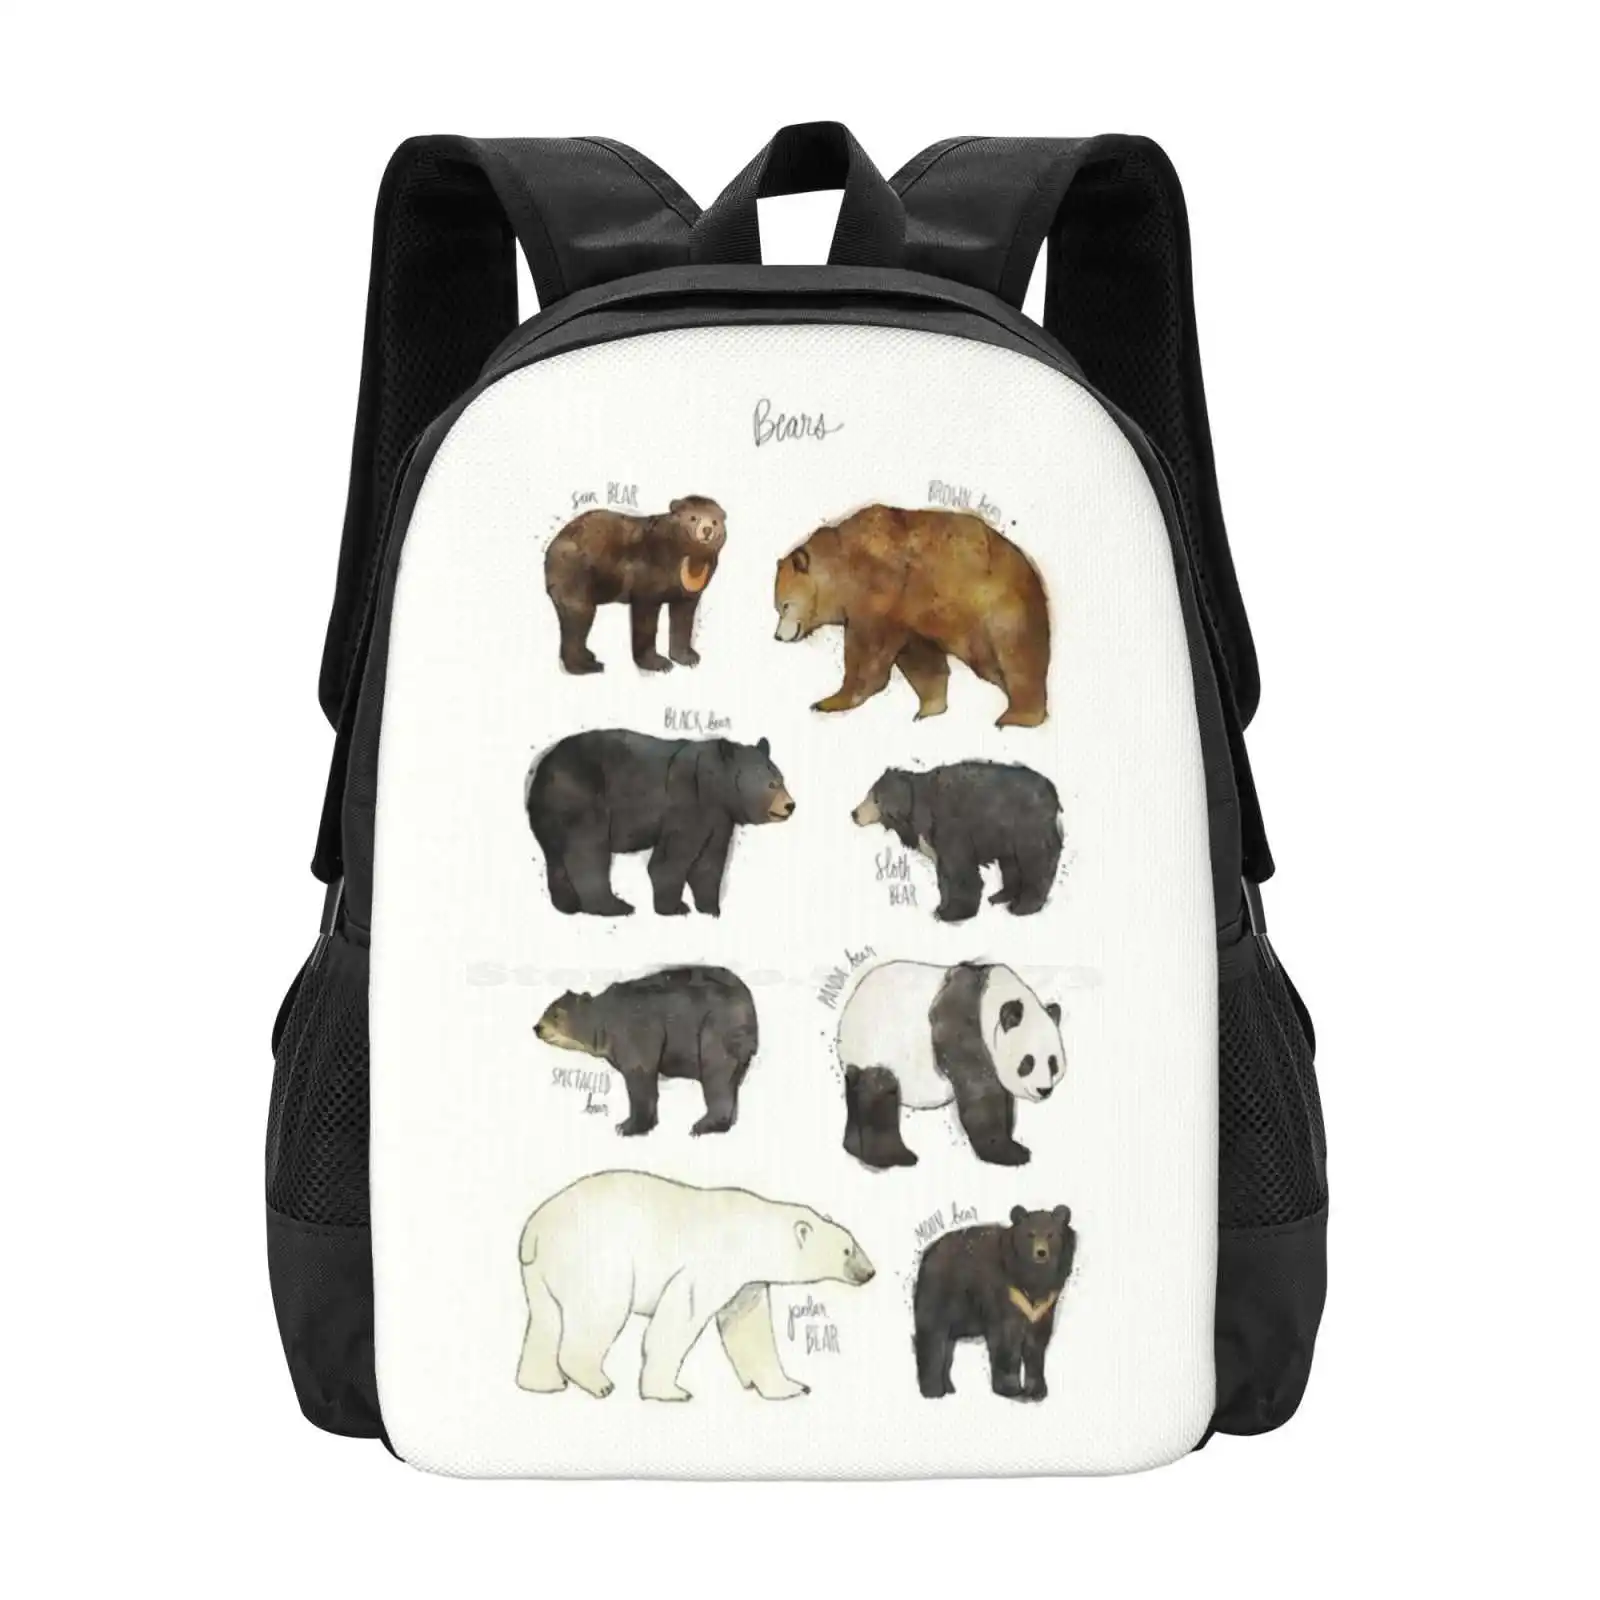 

Bears Hot Sale Backpack Fashion Bags Bears Nature Animals Wildlife Wilderness Fauna Forest Woodland Creature Sun Moon Black